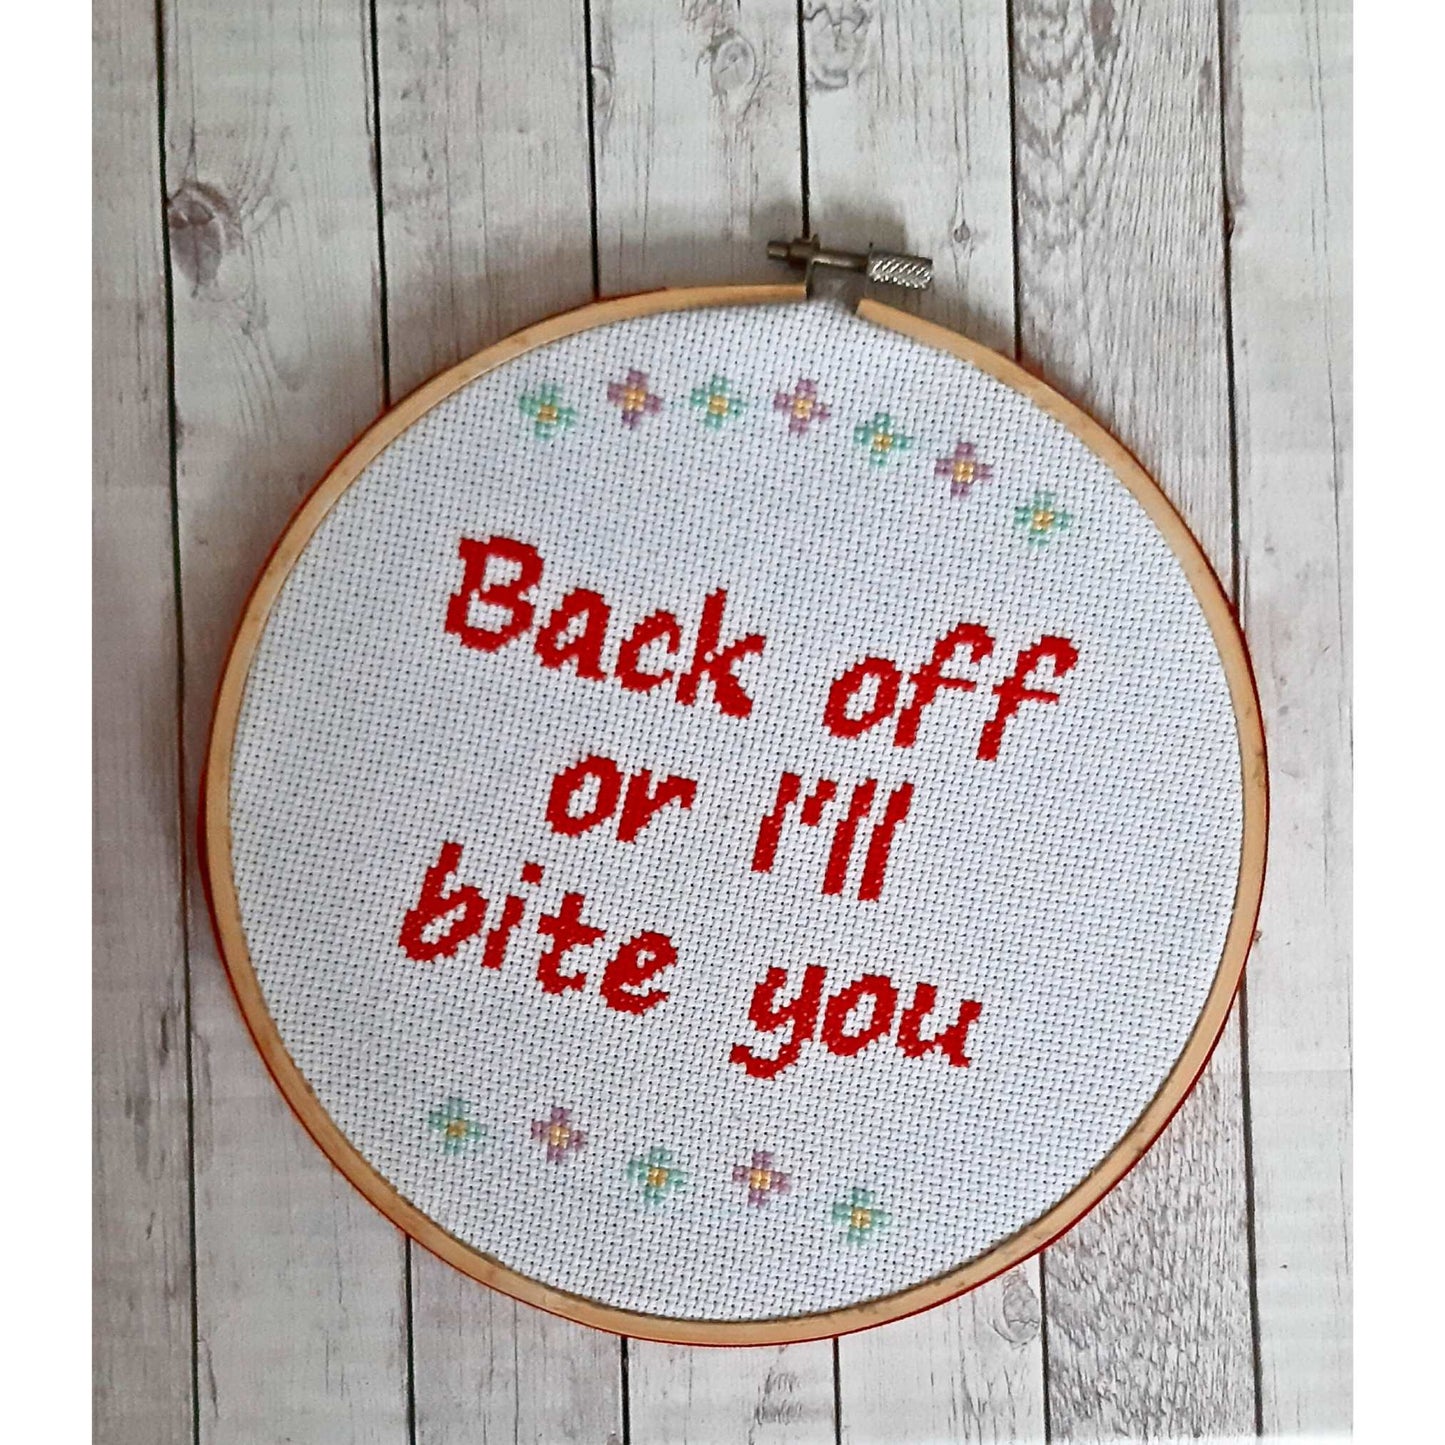 Back off or I'll bite you, completed cross stitch quote